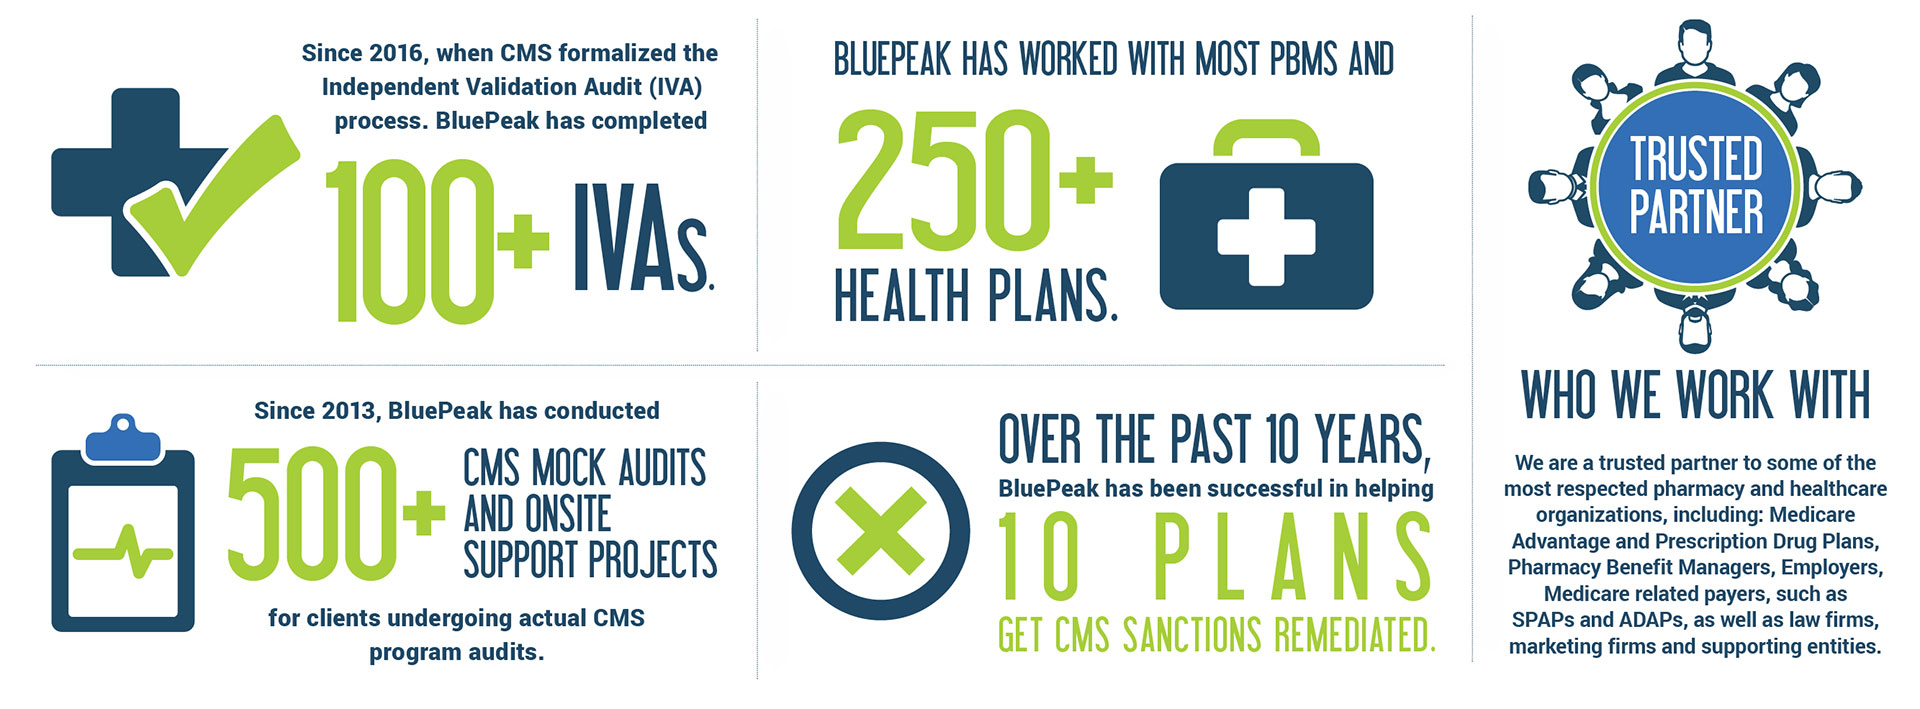 Infographic: Since 2016, when CMS formalized the Independent Validation Audit (IVA) process. BluePeak has completed 100+ IVAs. Since 2013, BluePeak has conducted 500+ CMS mock audits and onsite support projects for clients undergoing actual CMS program audits. BluePeak has worked with MOST PBMs and 250+ health plans. Over the past 10 years, BluePeak has been successful in helping 10 plans get CMS sanctions remediated. Trusted Partner: Who We Are: We are a trusted partner to some of the most respected pharmacy and healthcare organizations, including: Medicare Advantage and Prescription Drug Plans, Pharmacy Benefit Managers, Employers, Medicare related payers, such as SPAPs and ADAPs, as well as law firms, marketing firms and supporting entities.